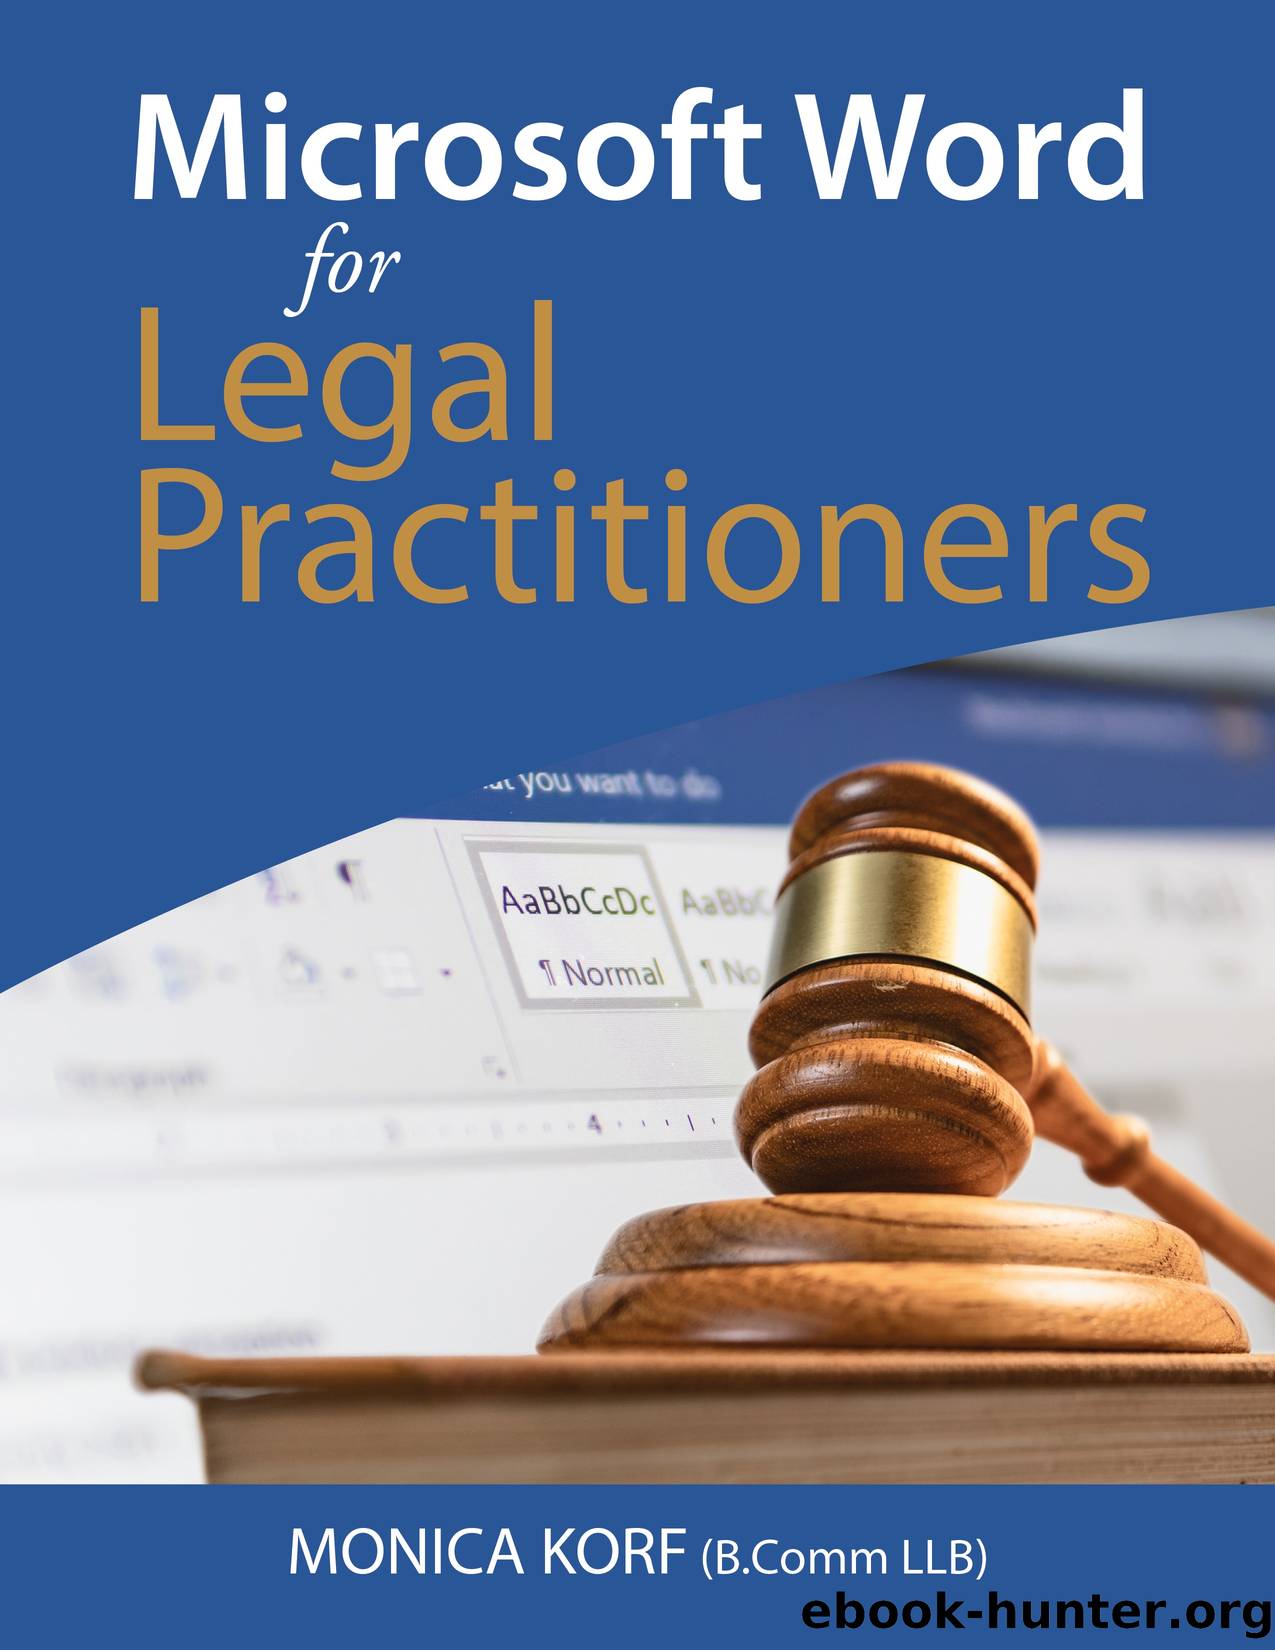 Microsoft Word for Legal Practitioners by Monica Korf